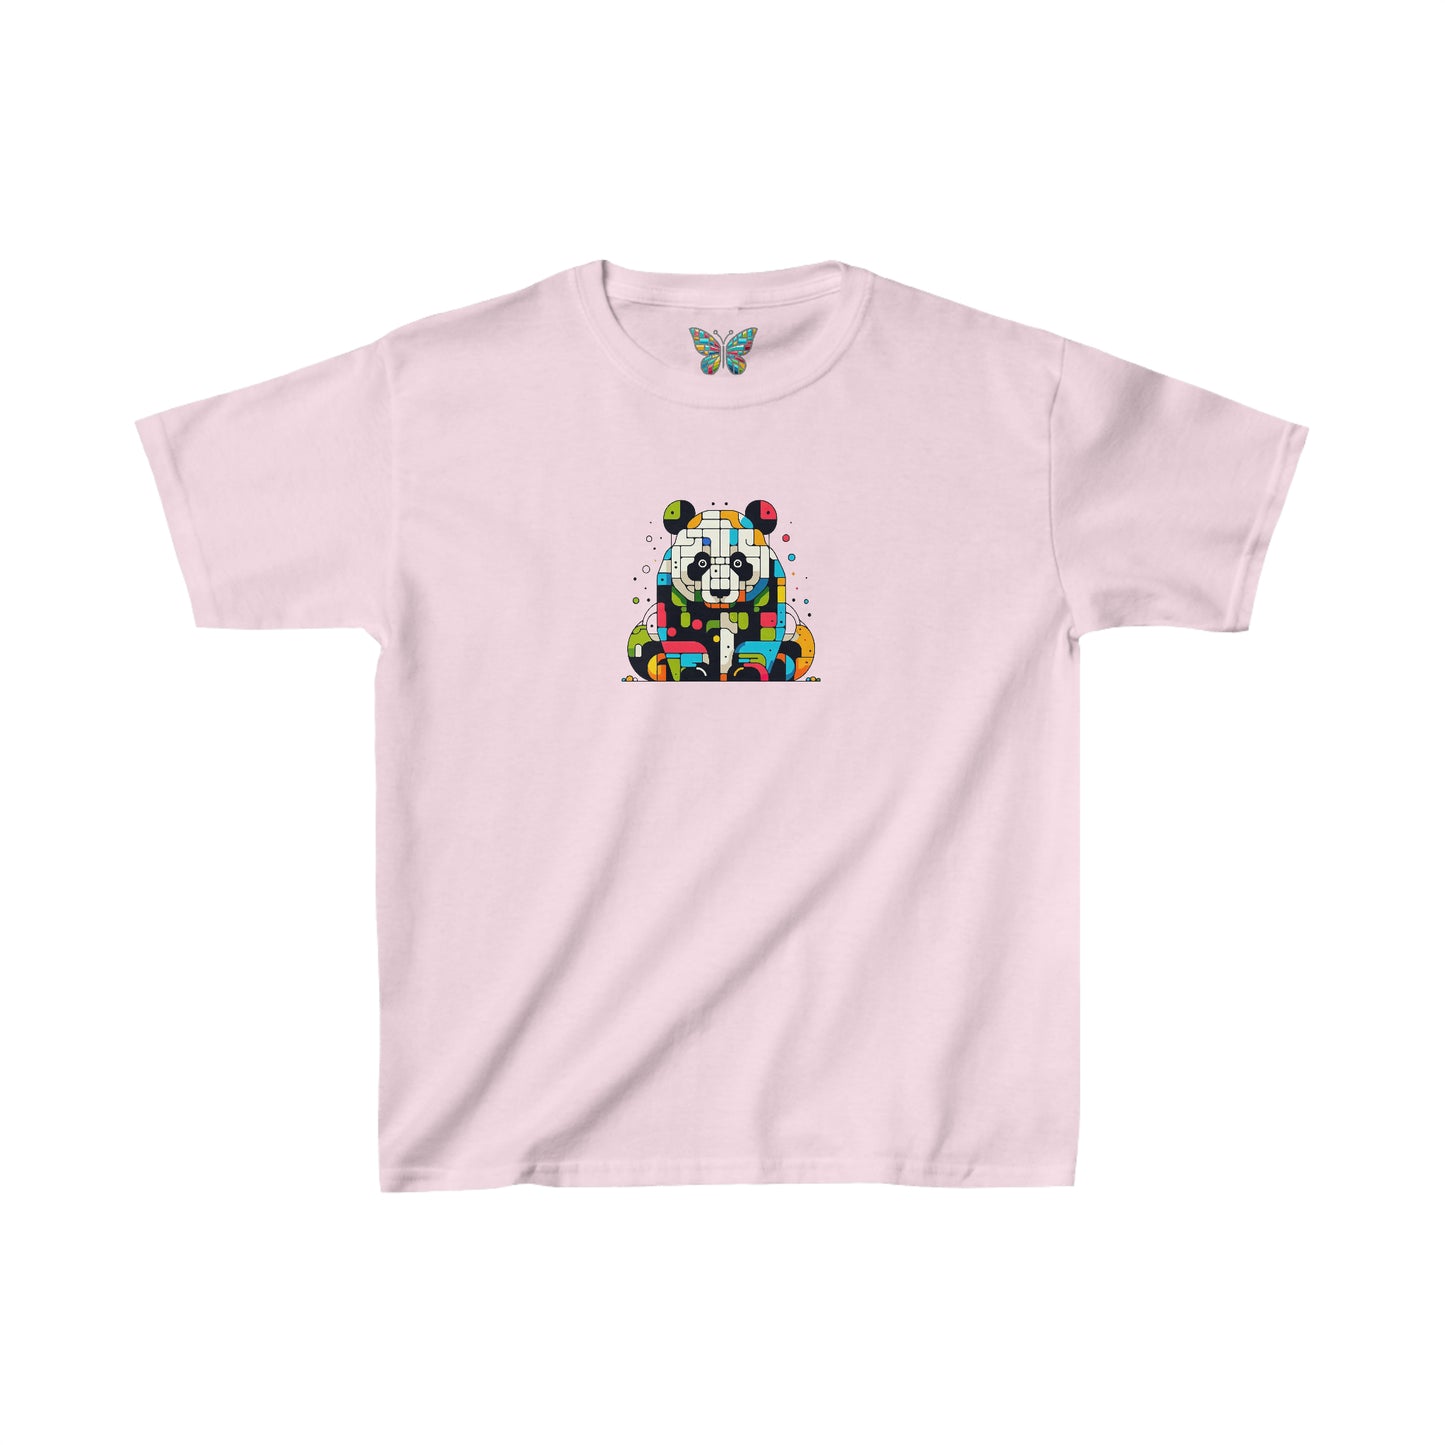 Giant Panda Solacitude - Youth - Snazzle Tee